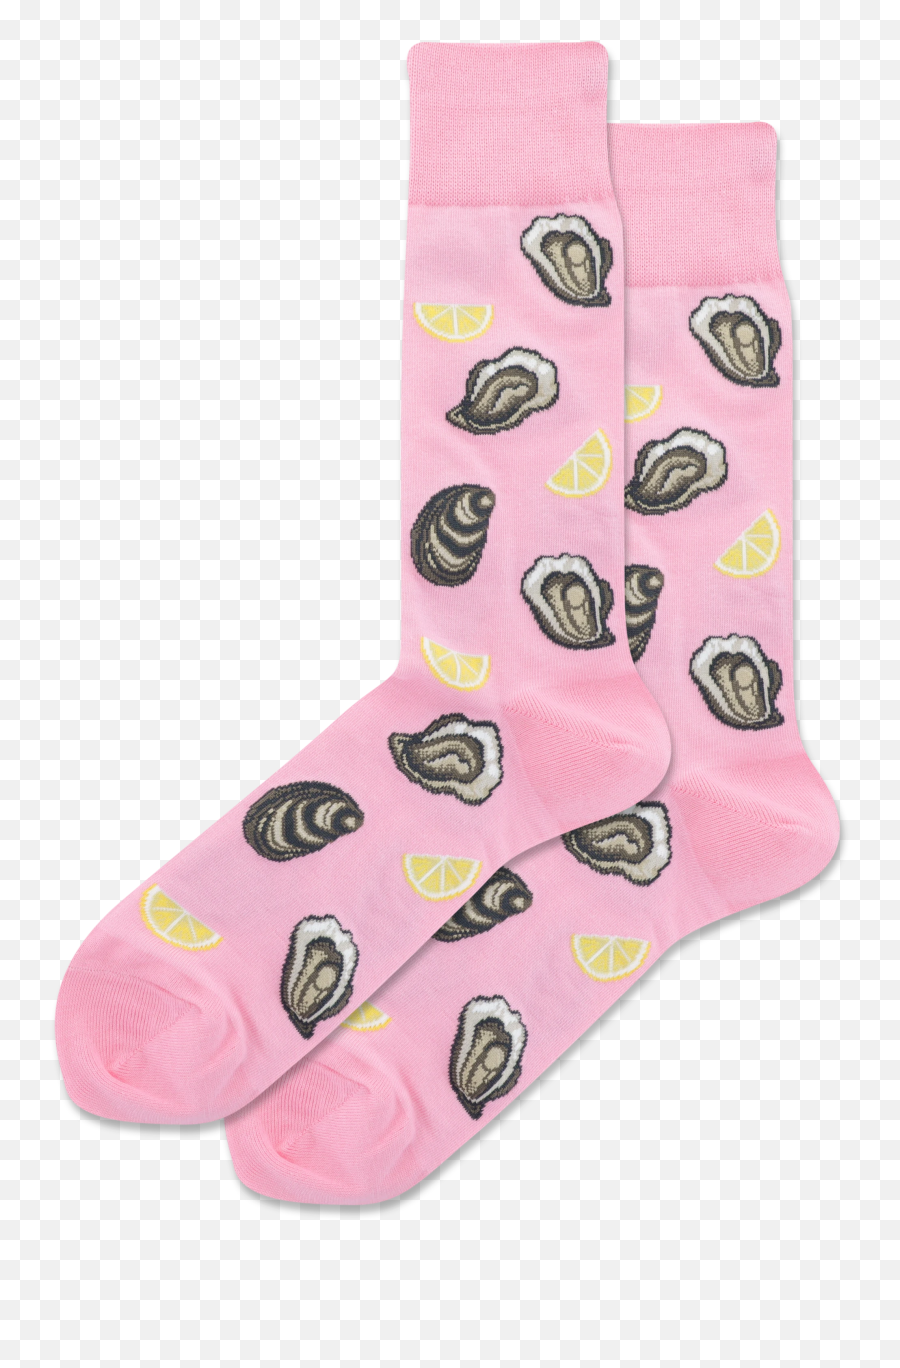 New Colors Styles For Spring - Girly Emoji,Socks With Emojis On Them For Kids